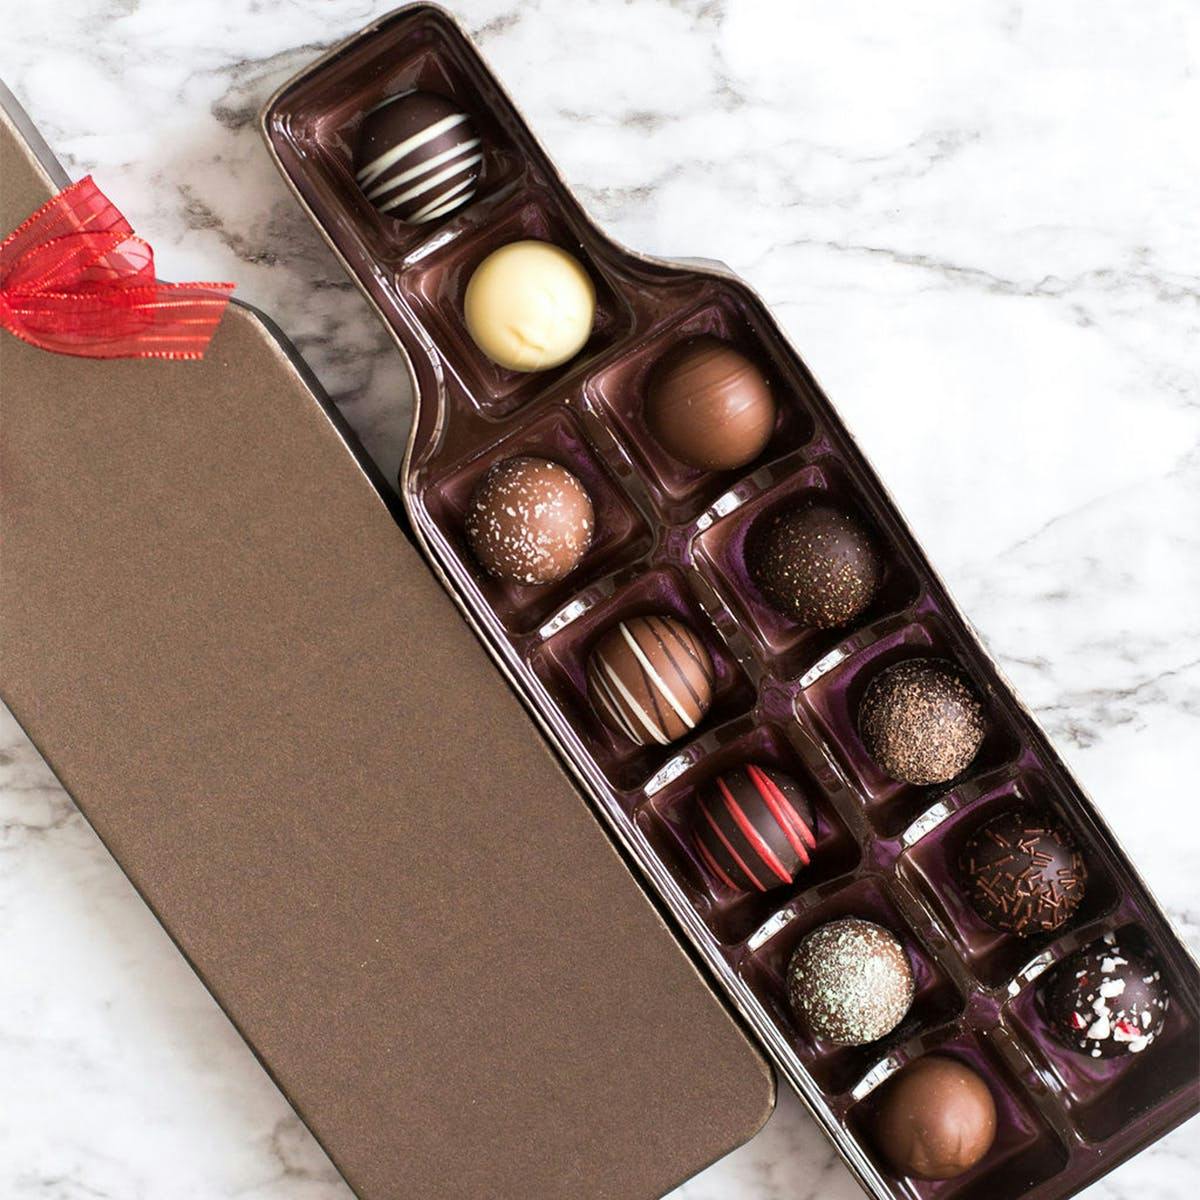 undefined | Wine Bottle Truffle Box - Box of 12 From Sugar Plum (Customer Reviews)